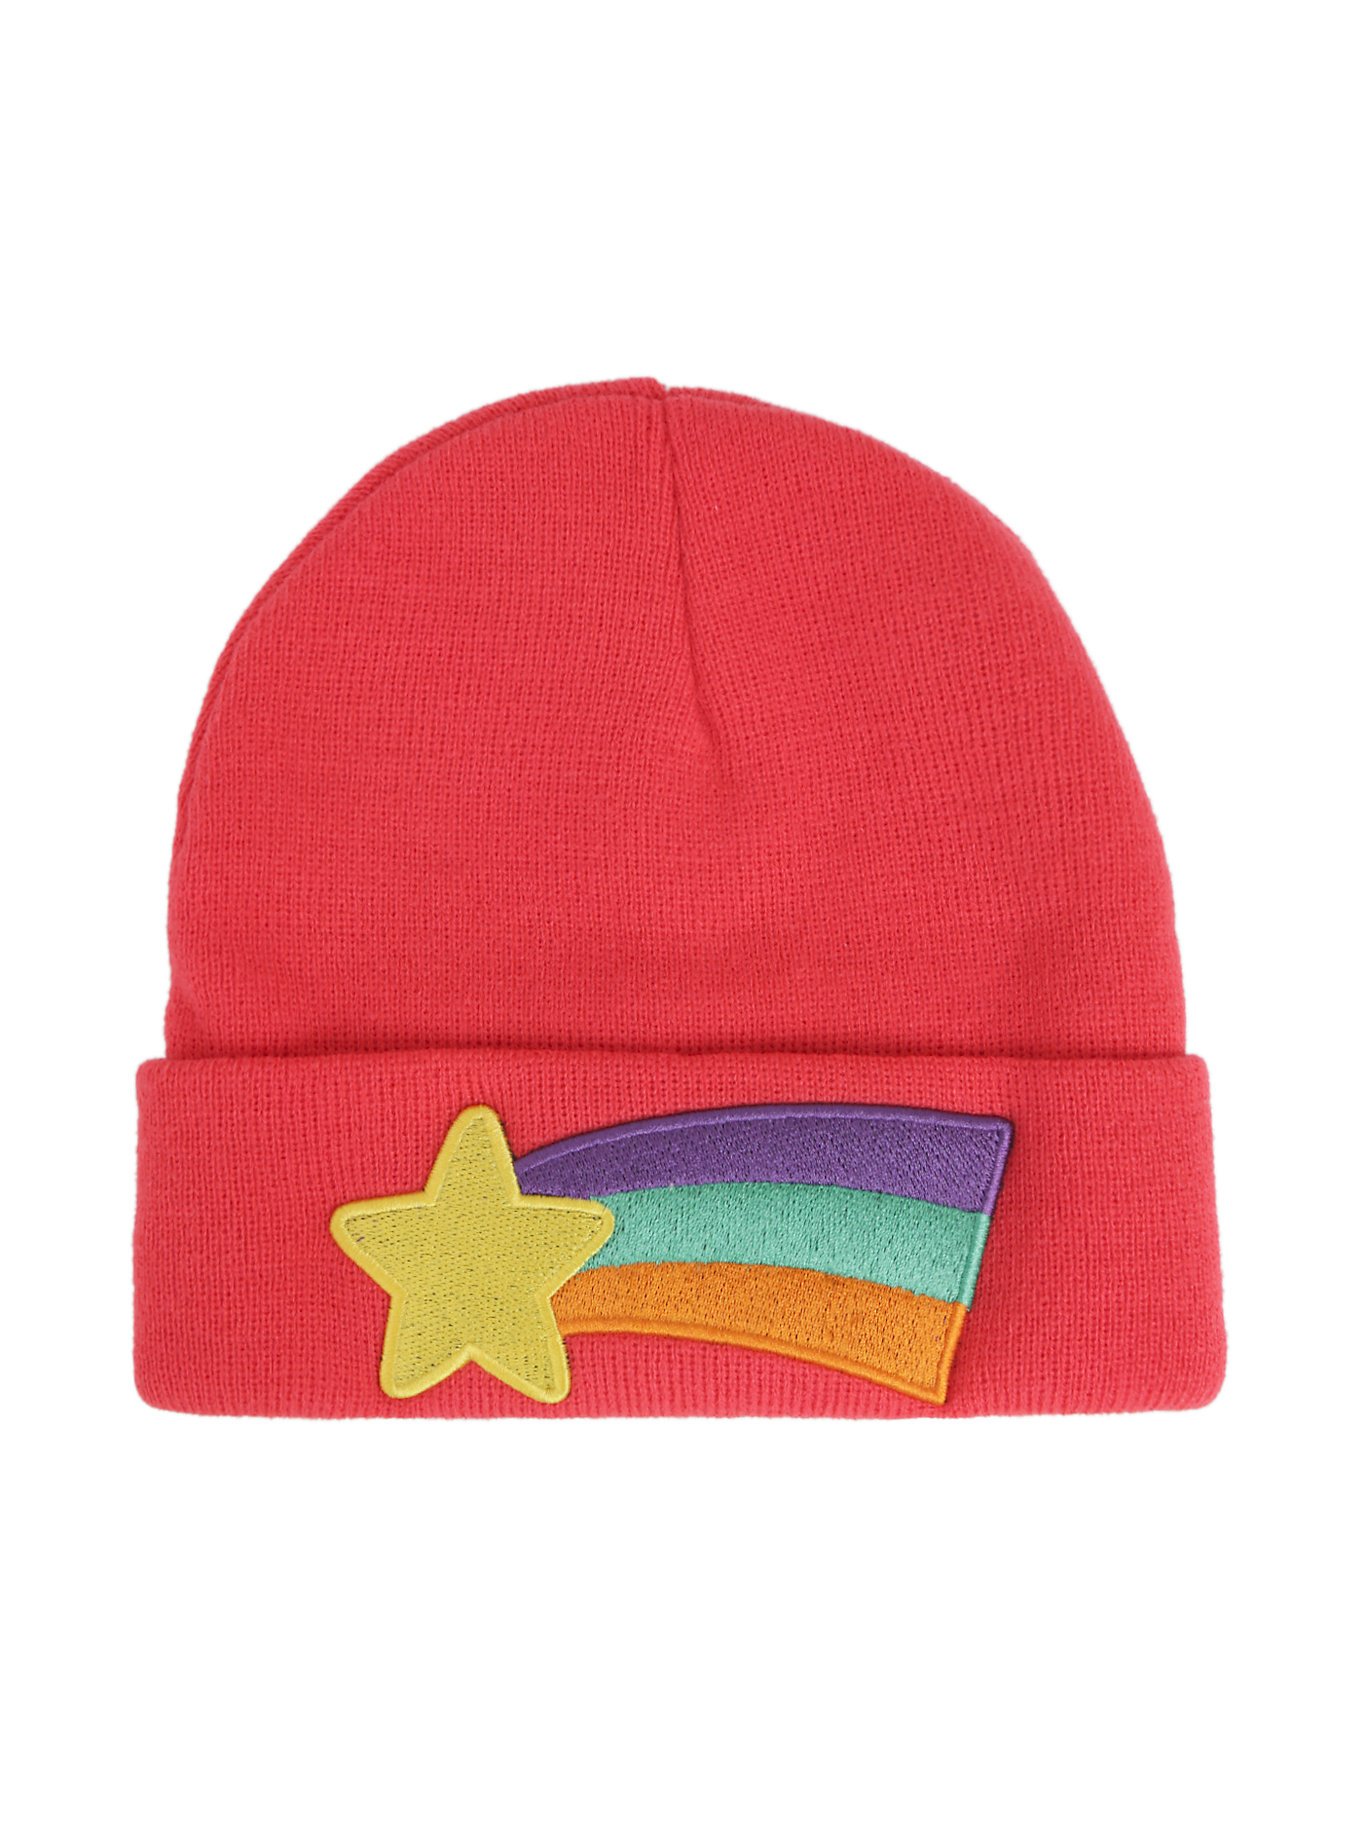 Ht Shooting Star Beanie.png - Beanie, Transparent background PNG HD thumbnail